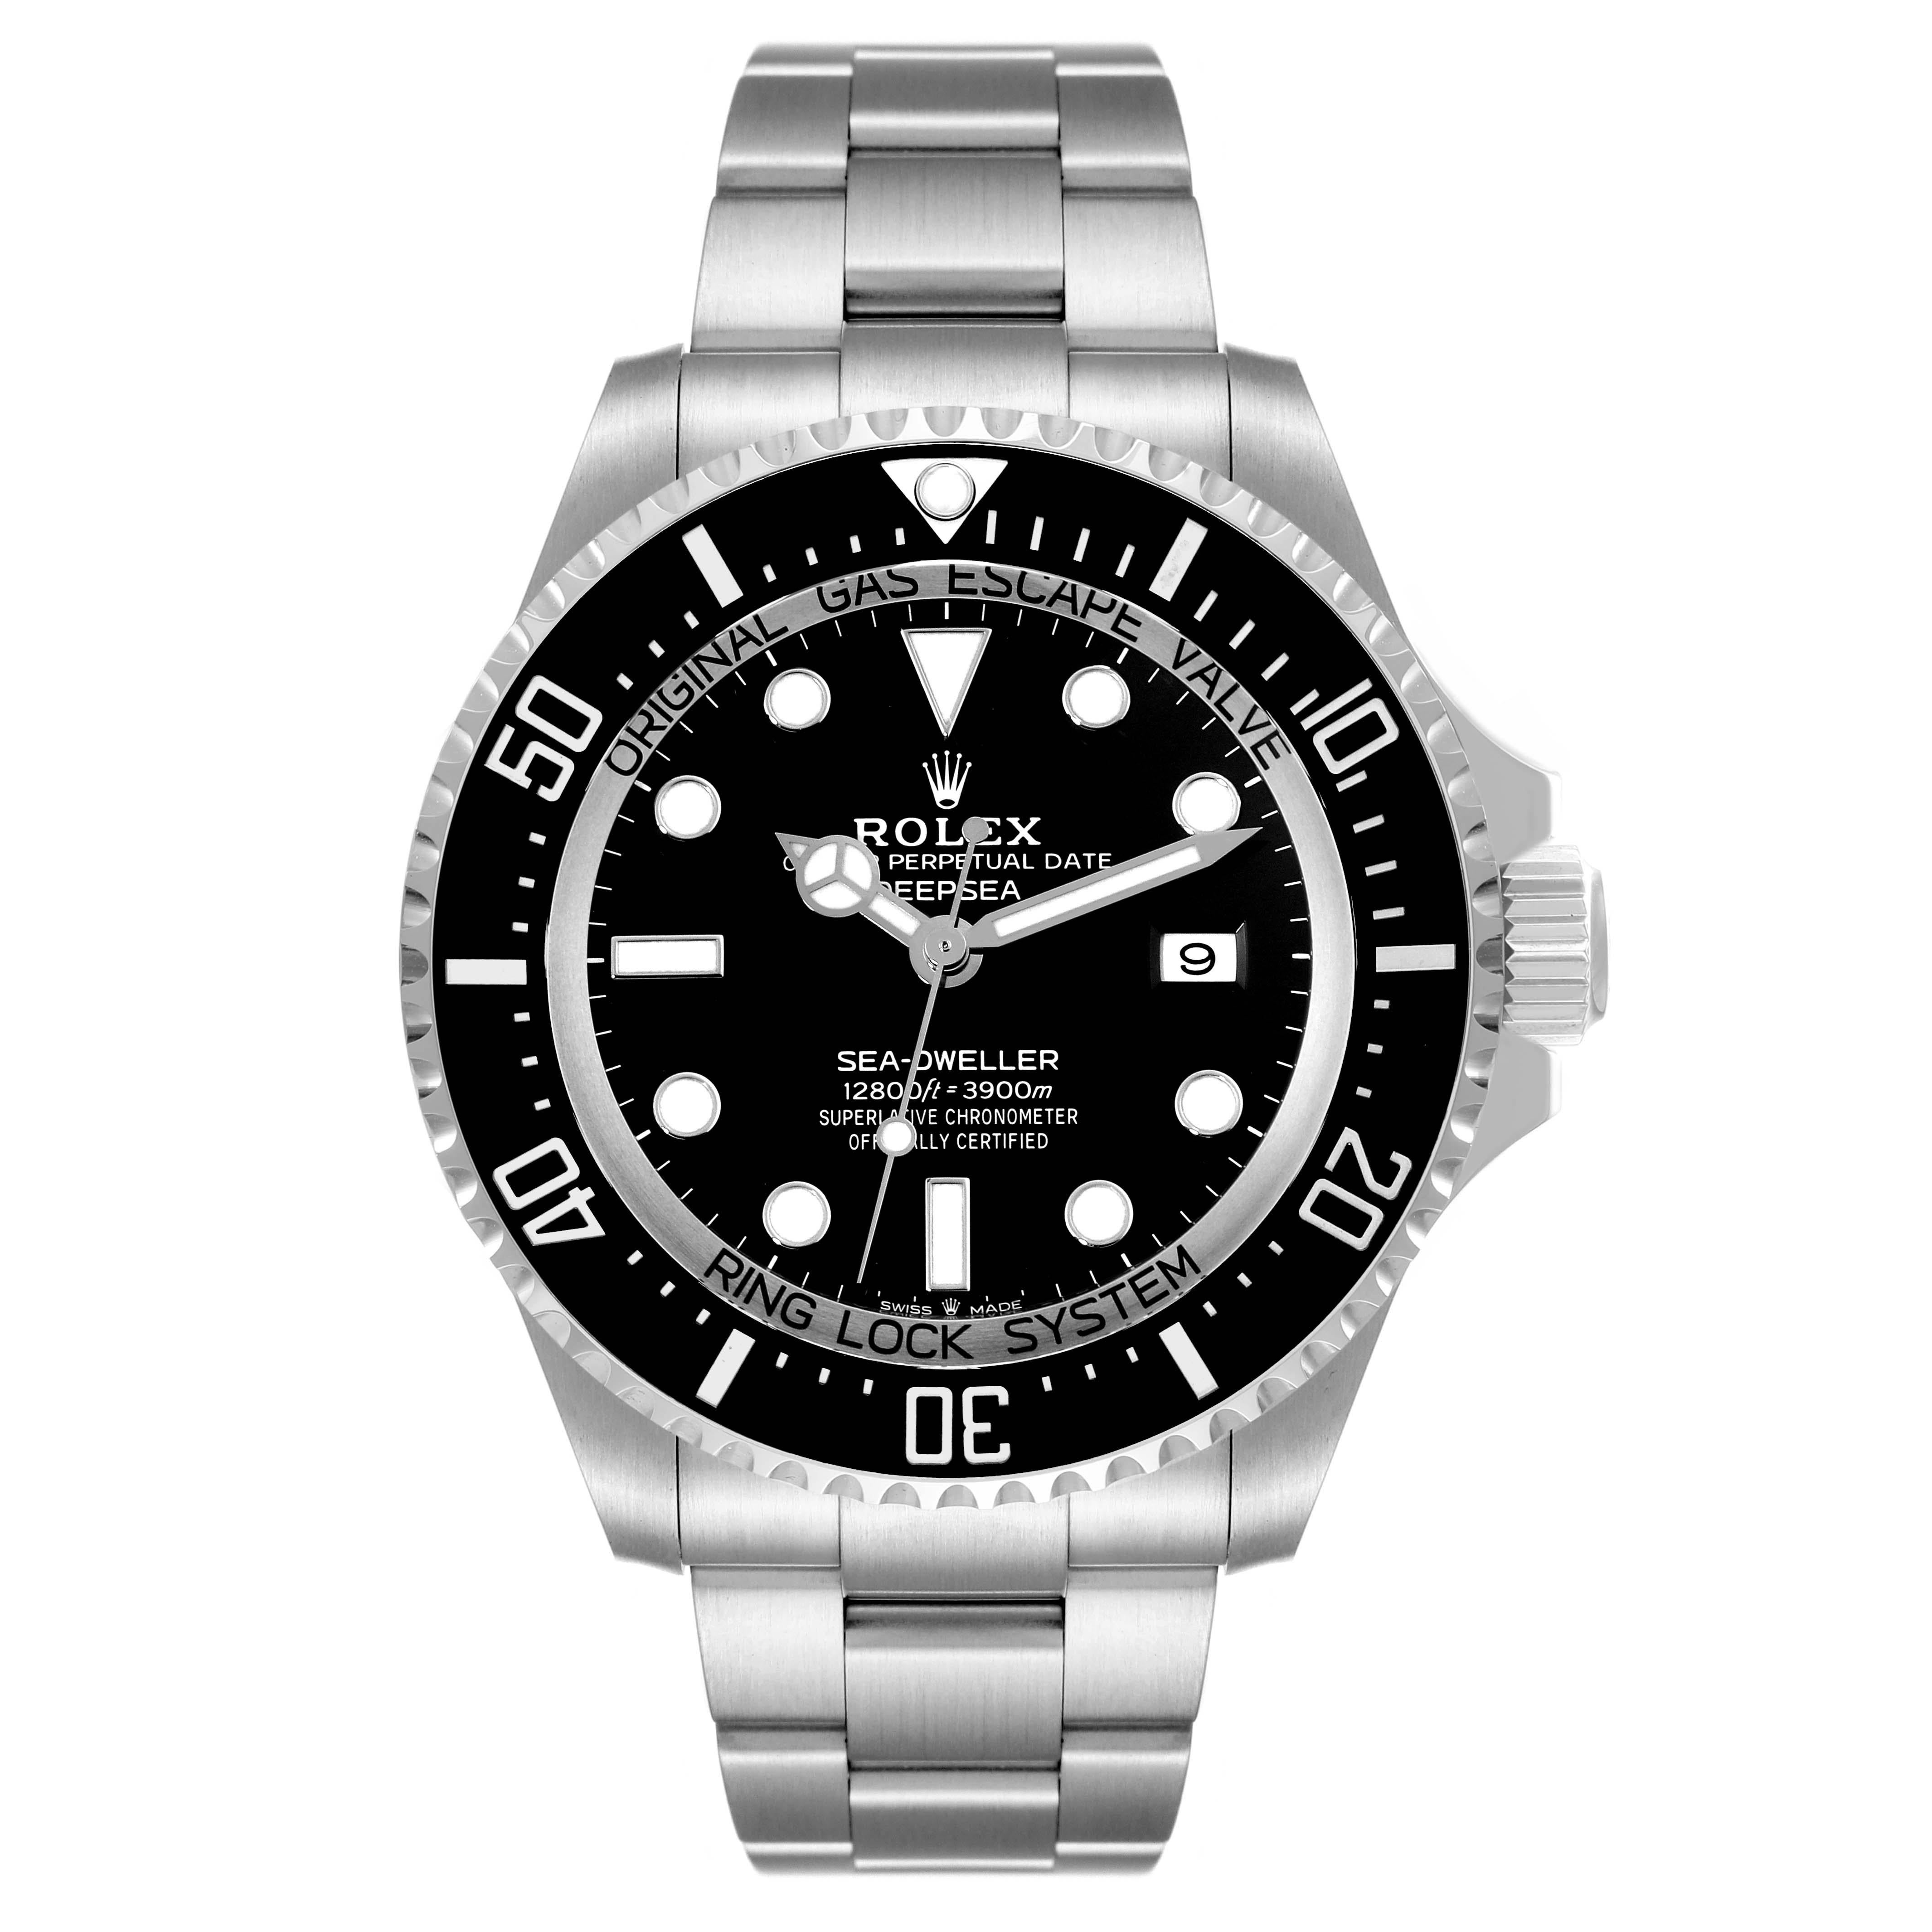 Rolex Seadweller Deepsea 44 Black Dial Steel Mens Watch 126660 Box Card. Officially certified chronometer automatic self-winding movement. Stainless steel oyster case 44 mm in diameter. Rolex logo on the crown. Special time-lapse unidirectional